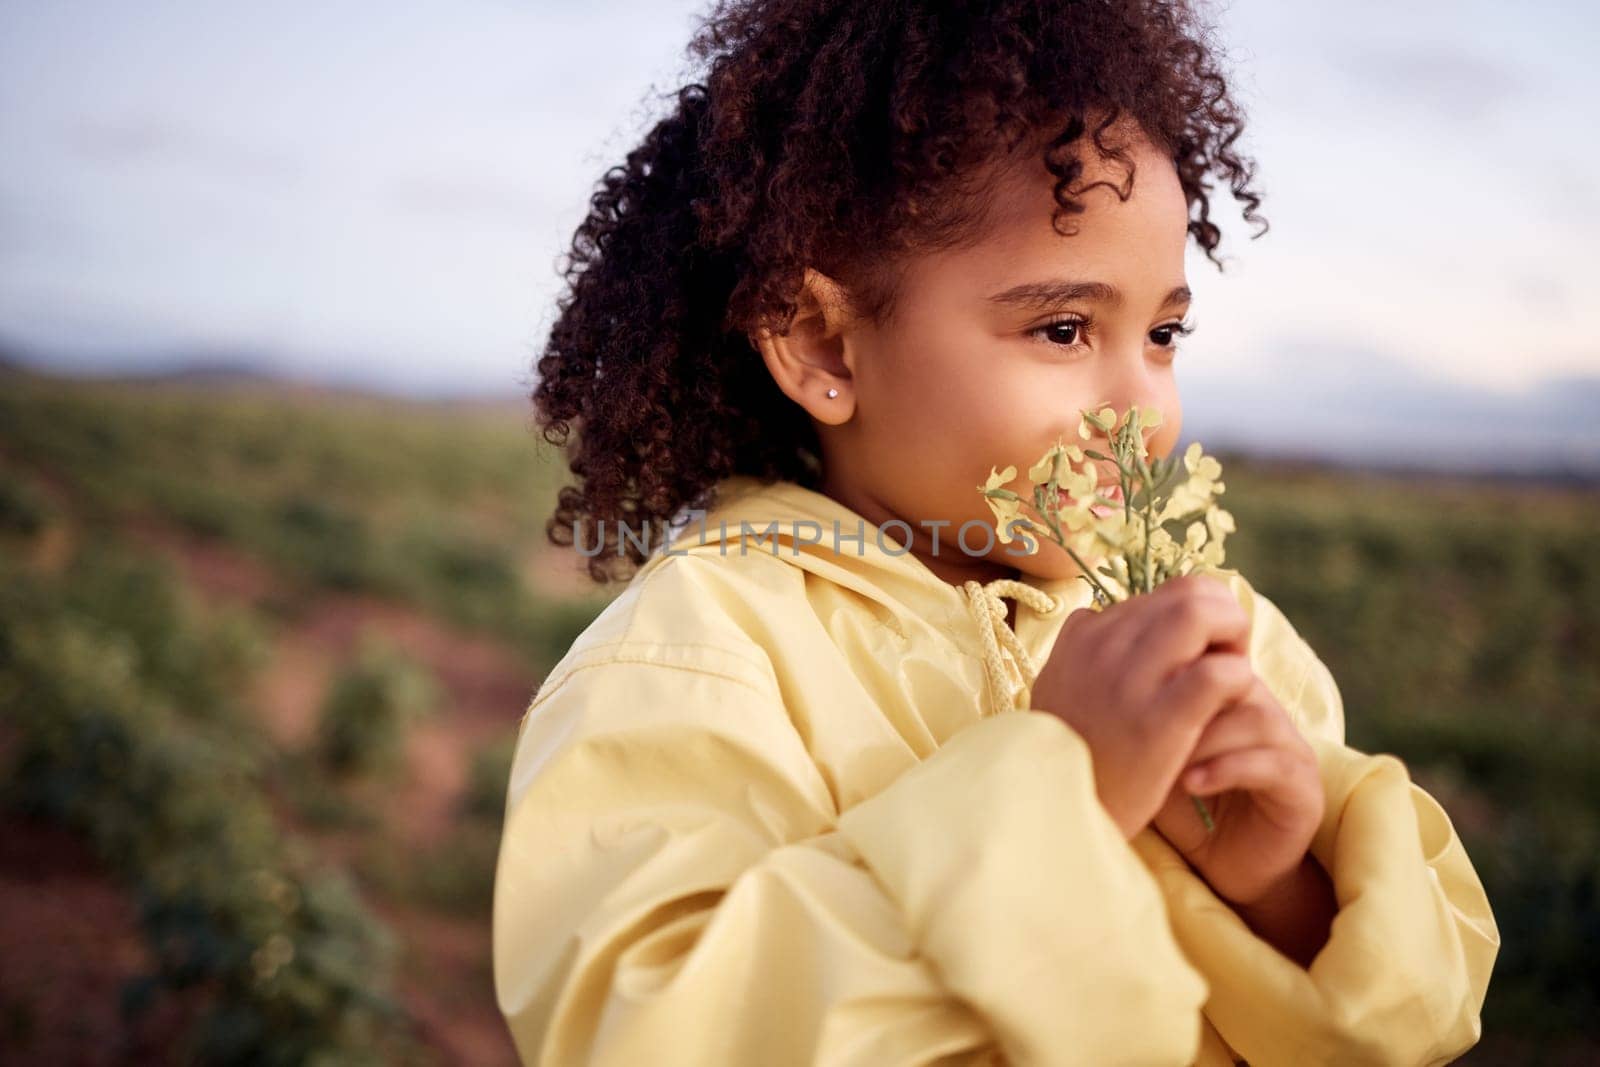 Children, farm and a girl smelling a flower outdoor in a field for agriculture or sustainability. Kids, nature and spring with a female child holding flowers to smell their aroma in the countryside.